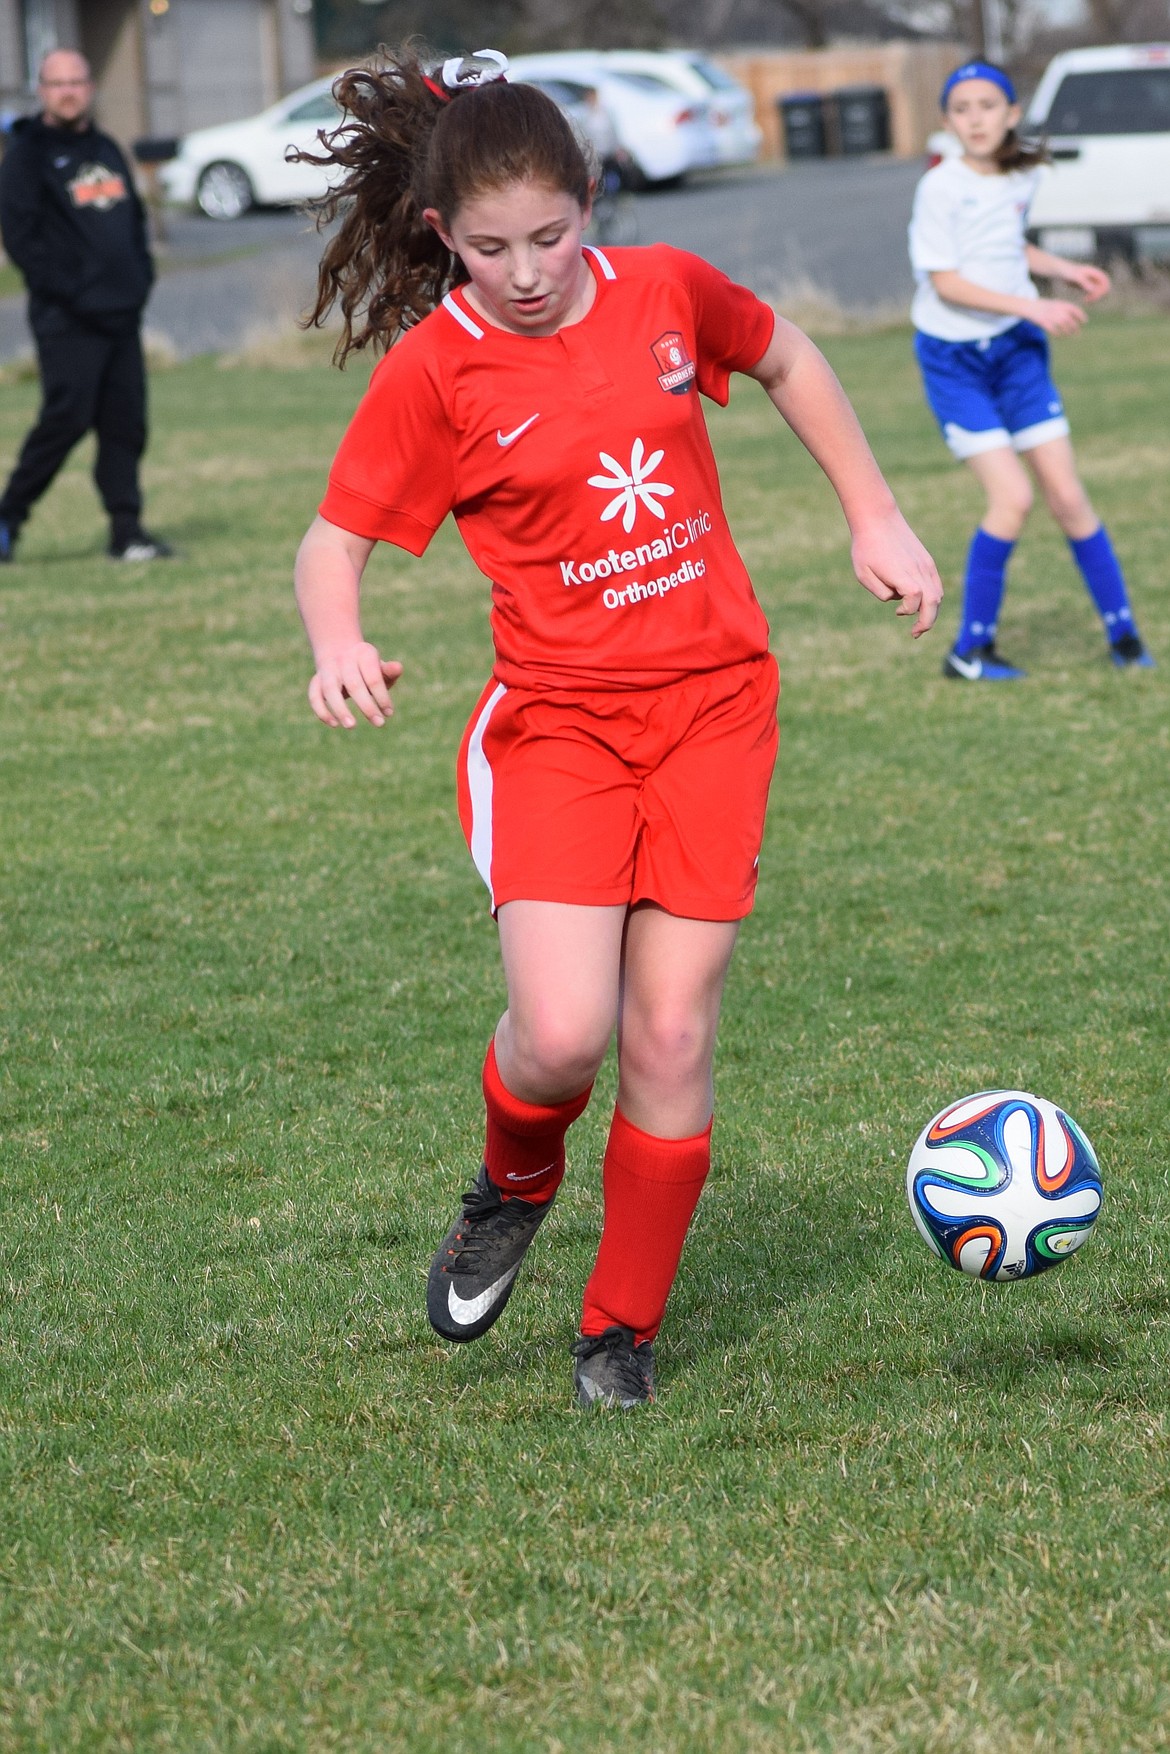 Courtesy photo
Evelyn Bowie held the line on defense and helped the Thorns North FC 07 Girls Red soccer team to a 1-0 victory against Wenatchee G07 Chandler on April 6.